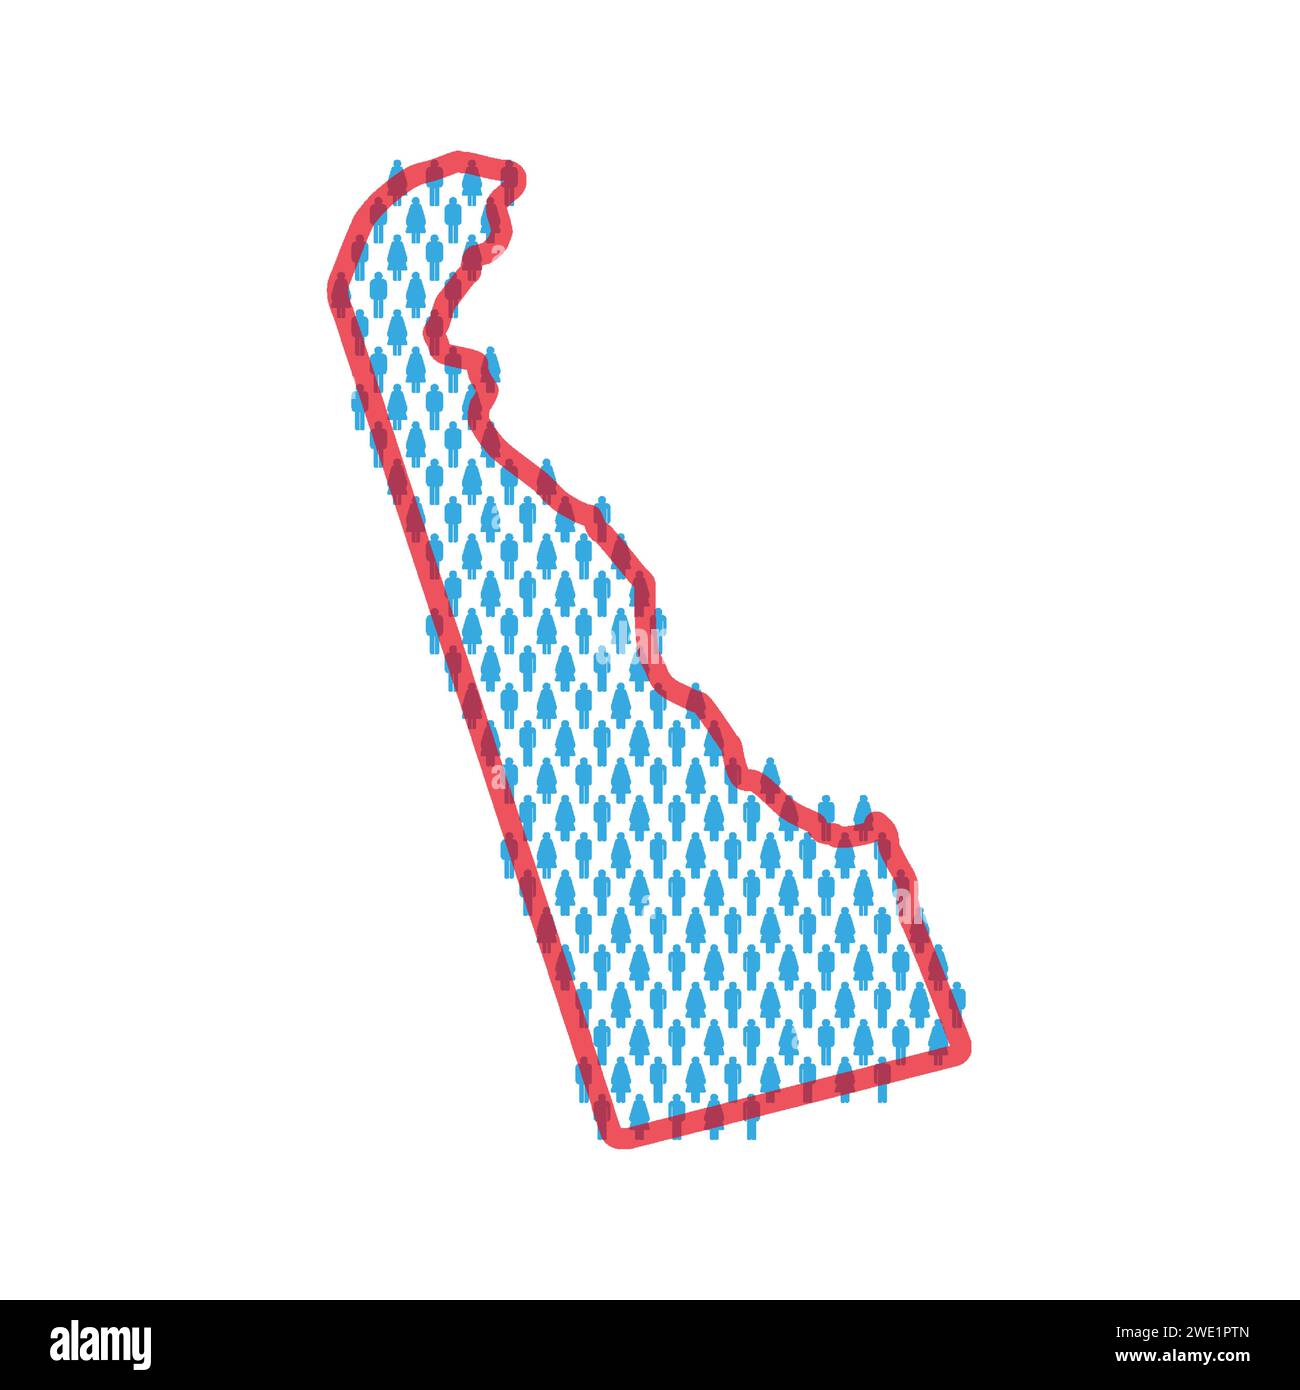 Delaware population map. Stick figures people map with bold red translucent state border. Pattern of men and women icons. Isolated vector illustration Stock Vector